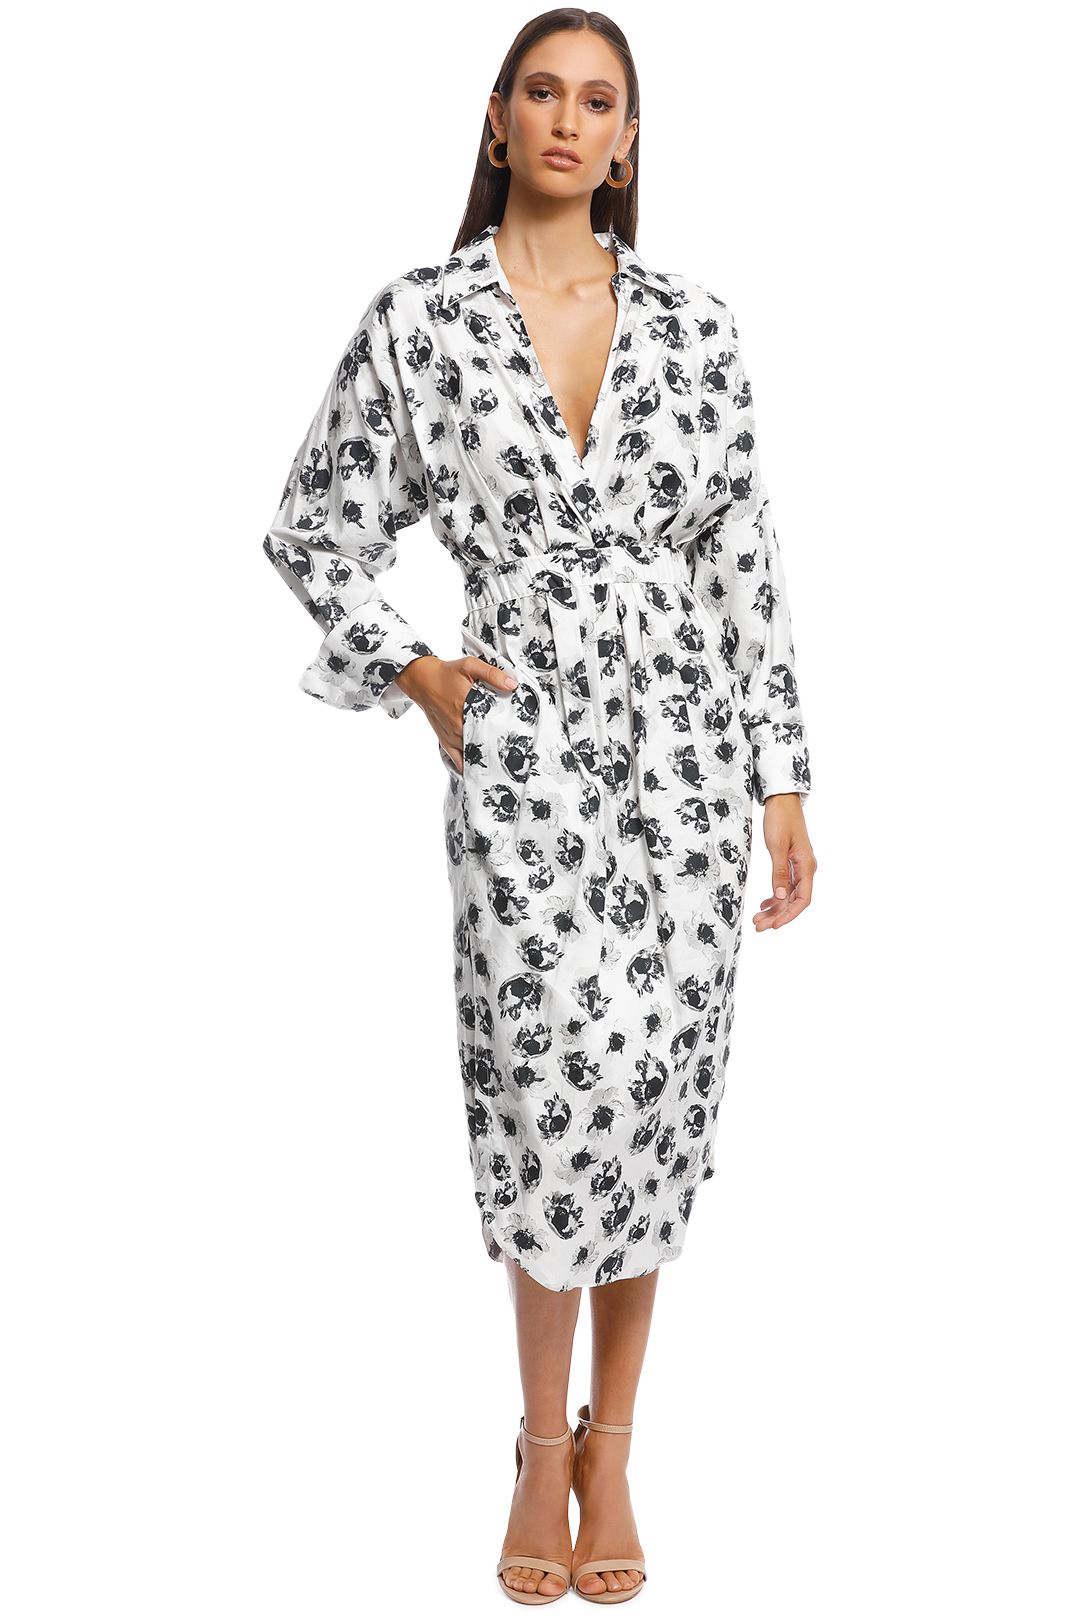 Camilla and Marc - Astra Midi Dress - Black and White - Front